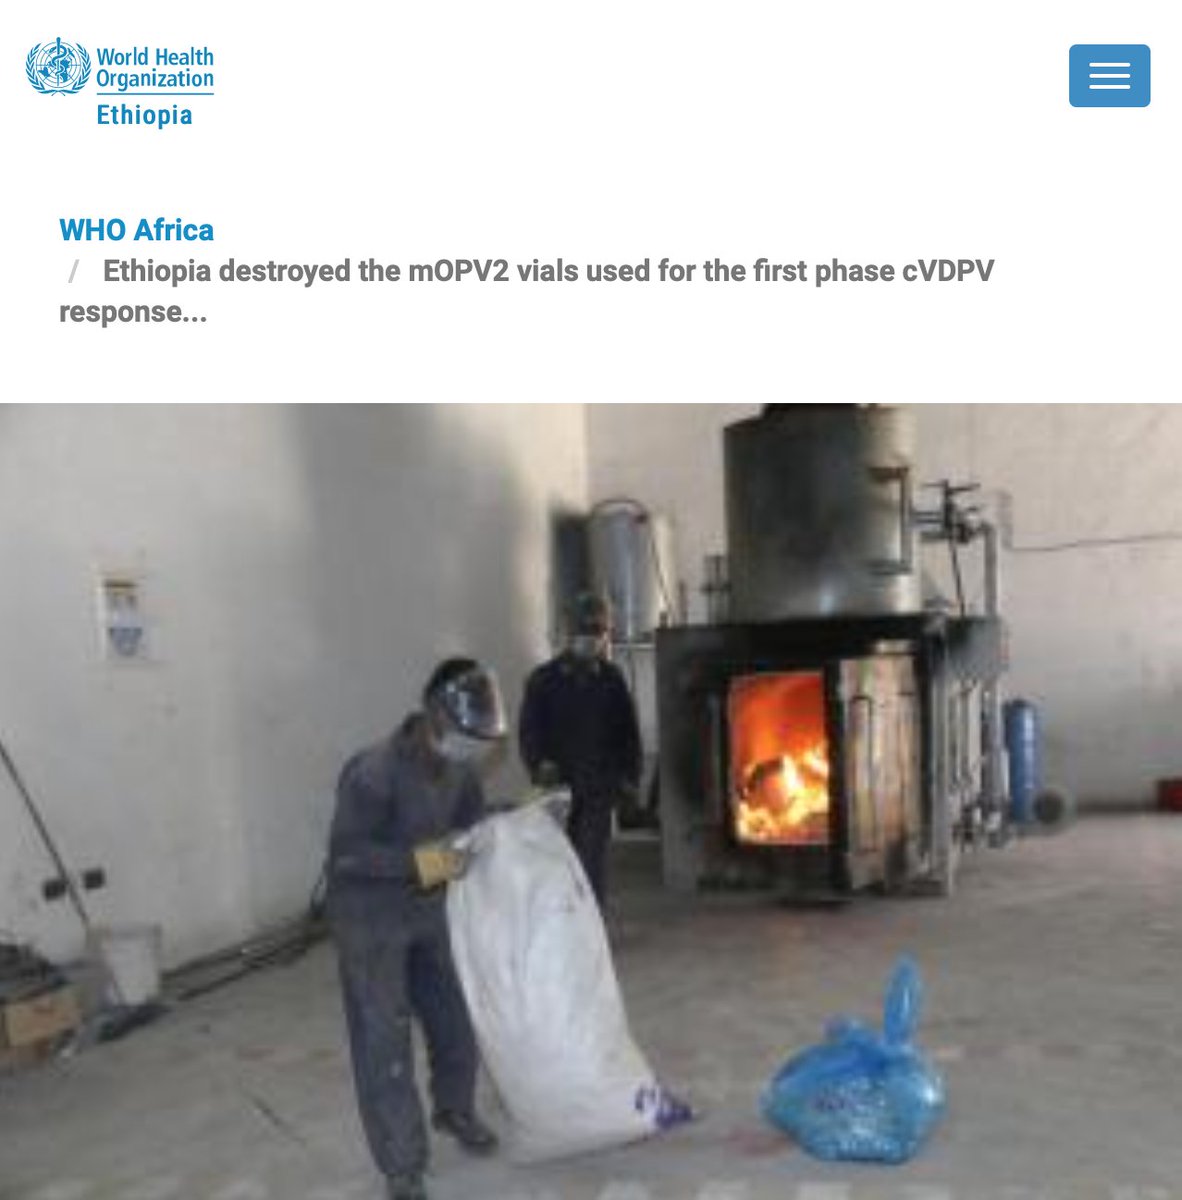 Ethiopia destroyed a total of 57,193 mOPV2 vaccine vials after a vaccine induced outbreak of polio.  https://www.afro.who.int/news/ethiopia-destroyed-mopv2-vials-used-first-phase-cvdpv-response